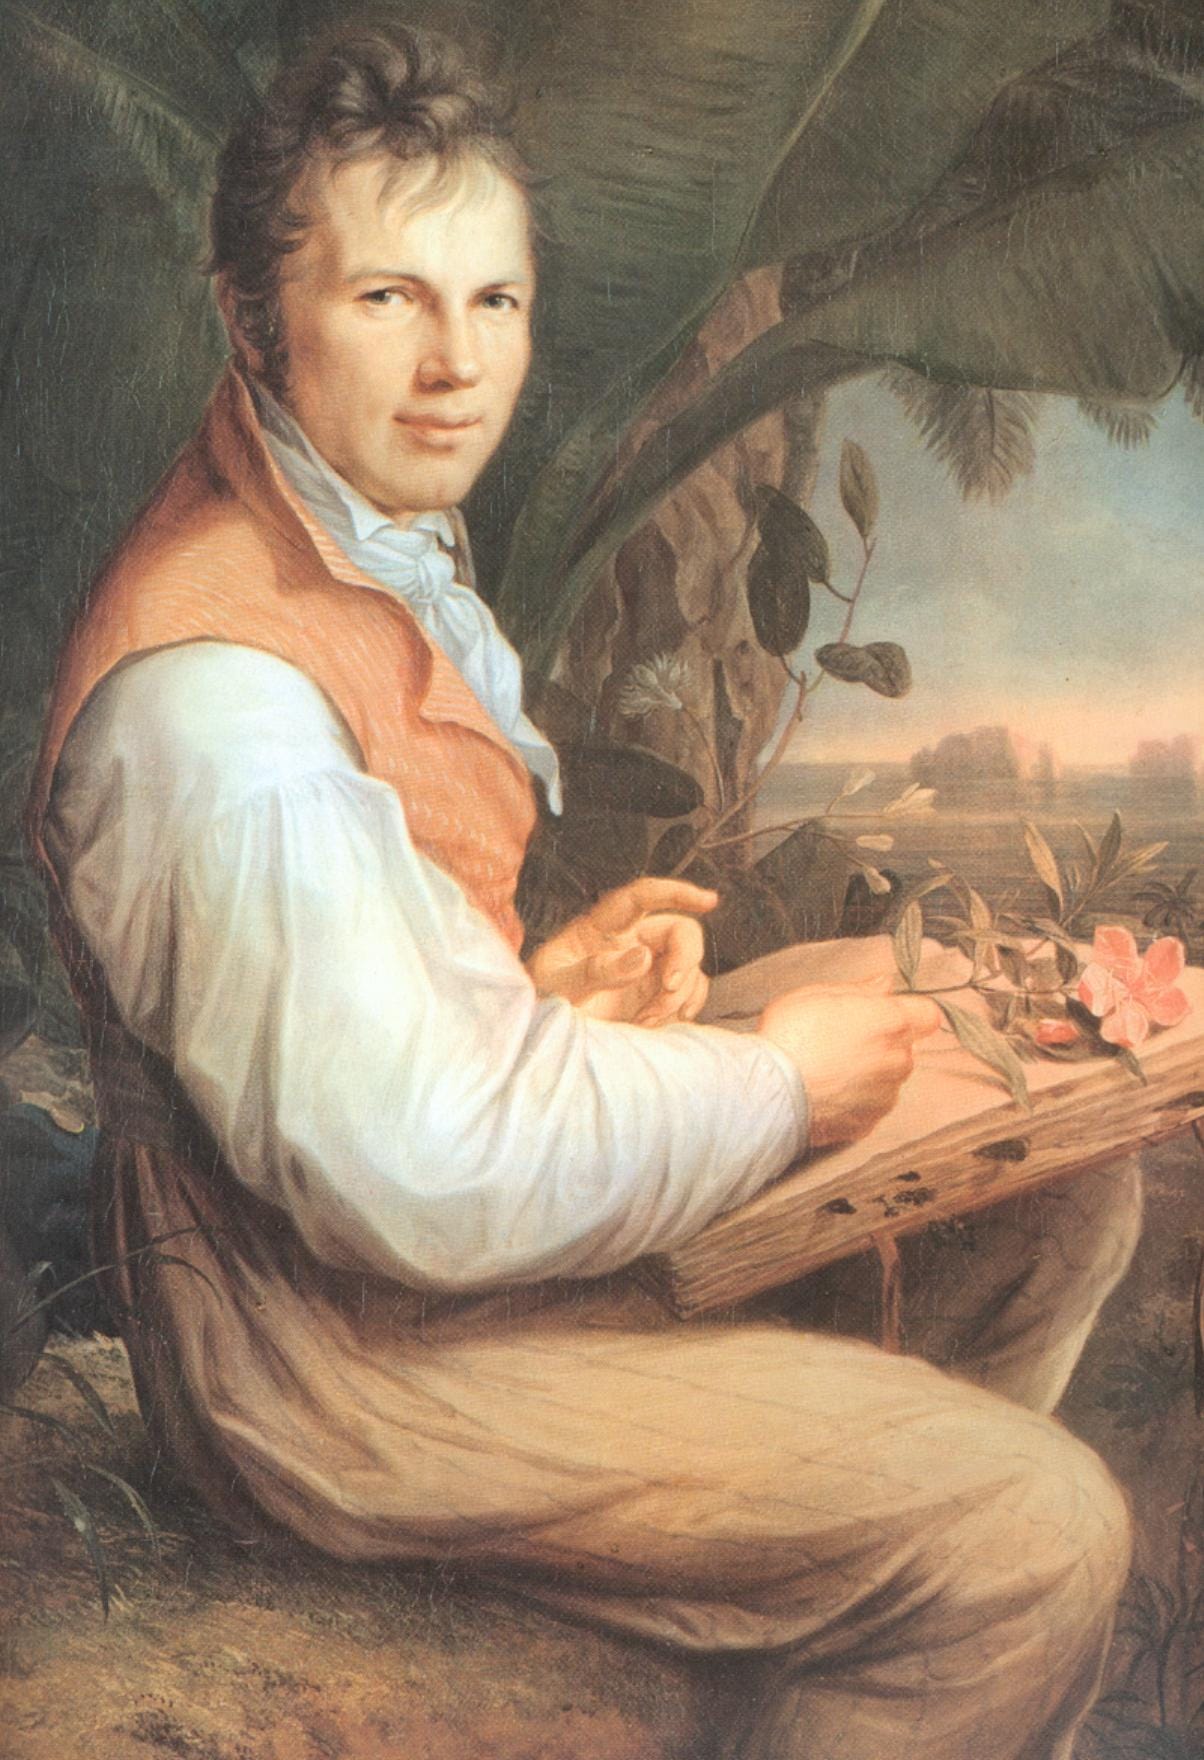 Looking at Nature through the Eyes of Alexander von Humboldt